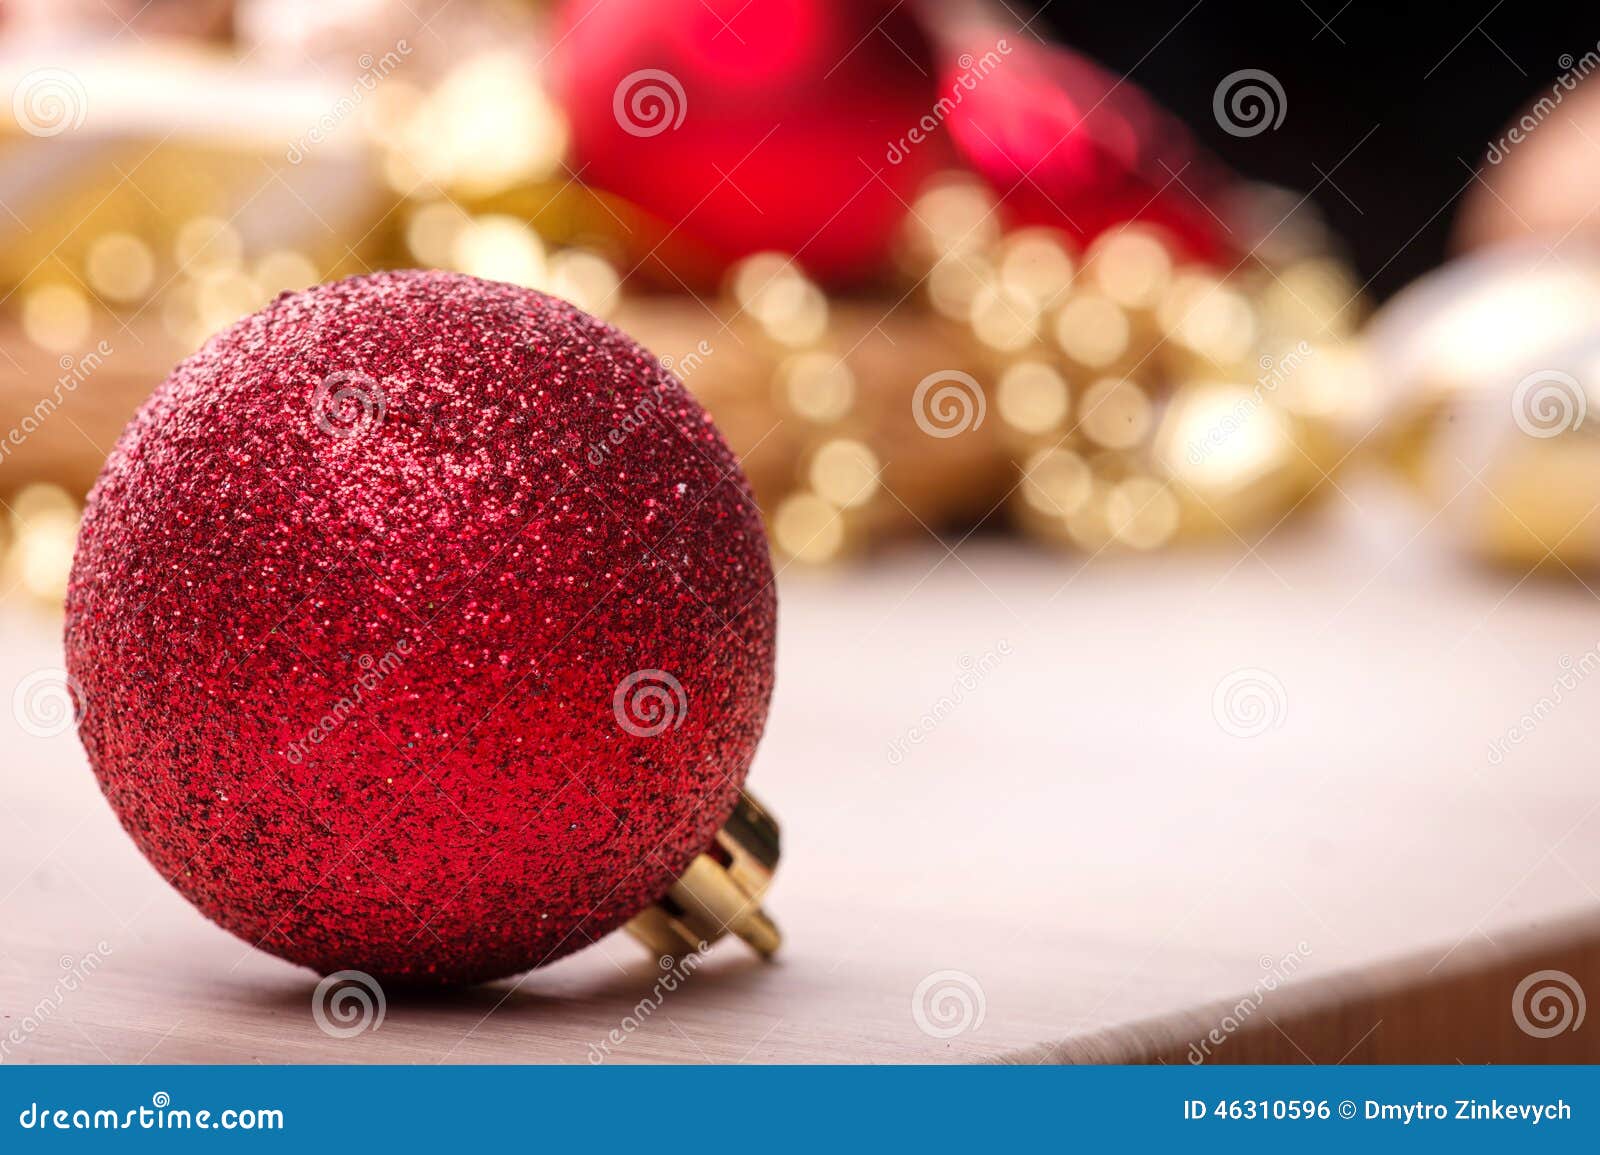 Christmas Toy on Wooden Table Stock Photo - Image of bell, december ...